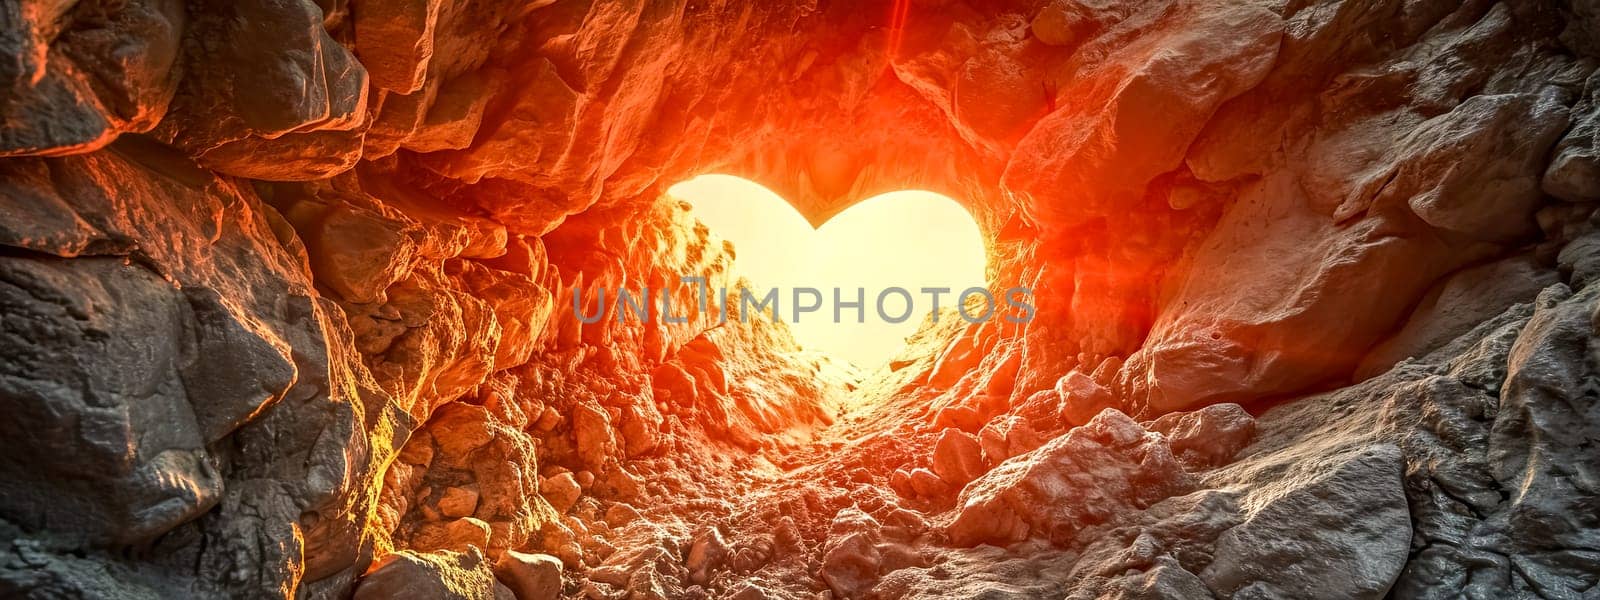 A captivating cave opening in the shape of a heart, illuminated by warm sunlight, creating a romantic natural frame within the rocky textures